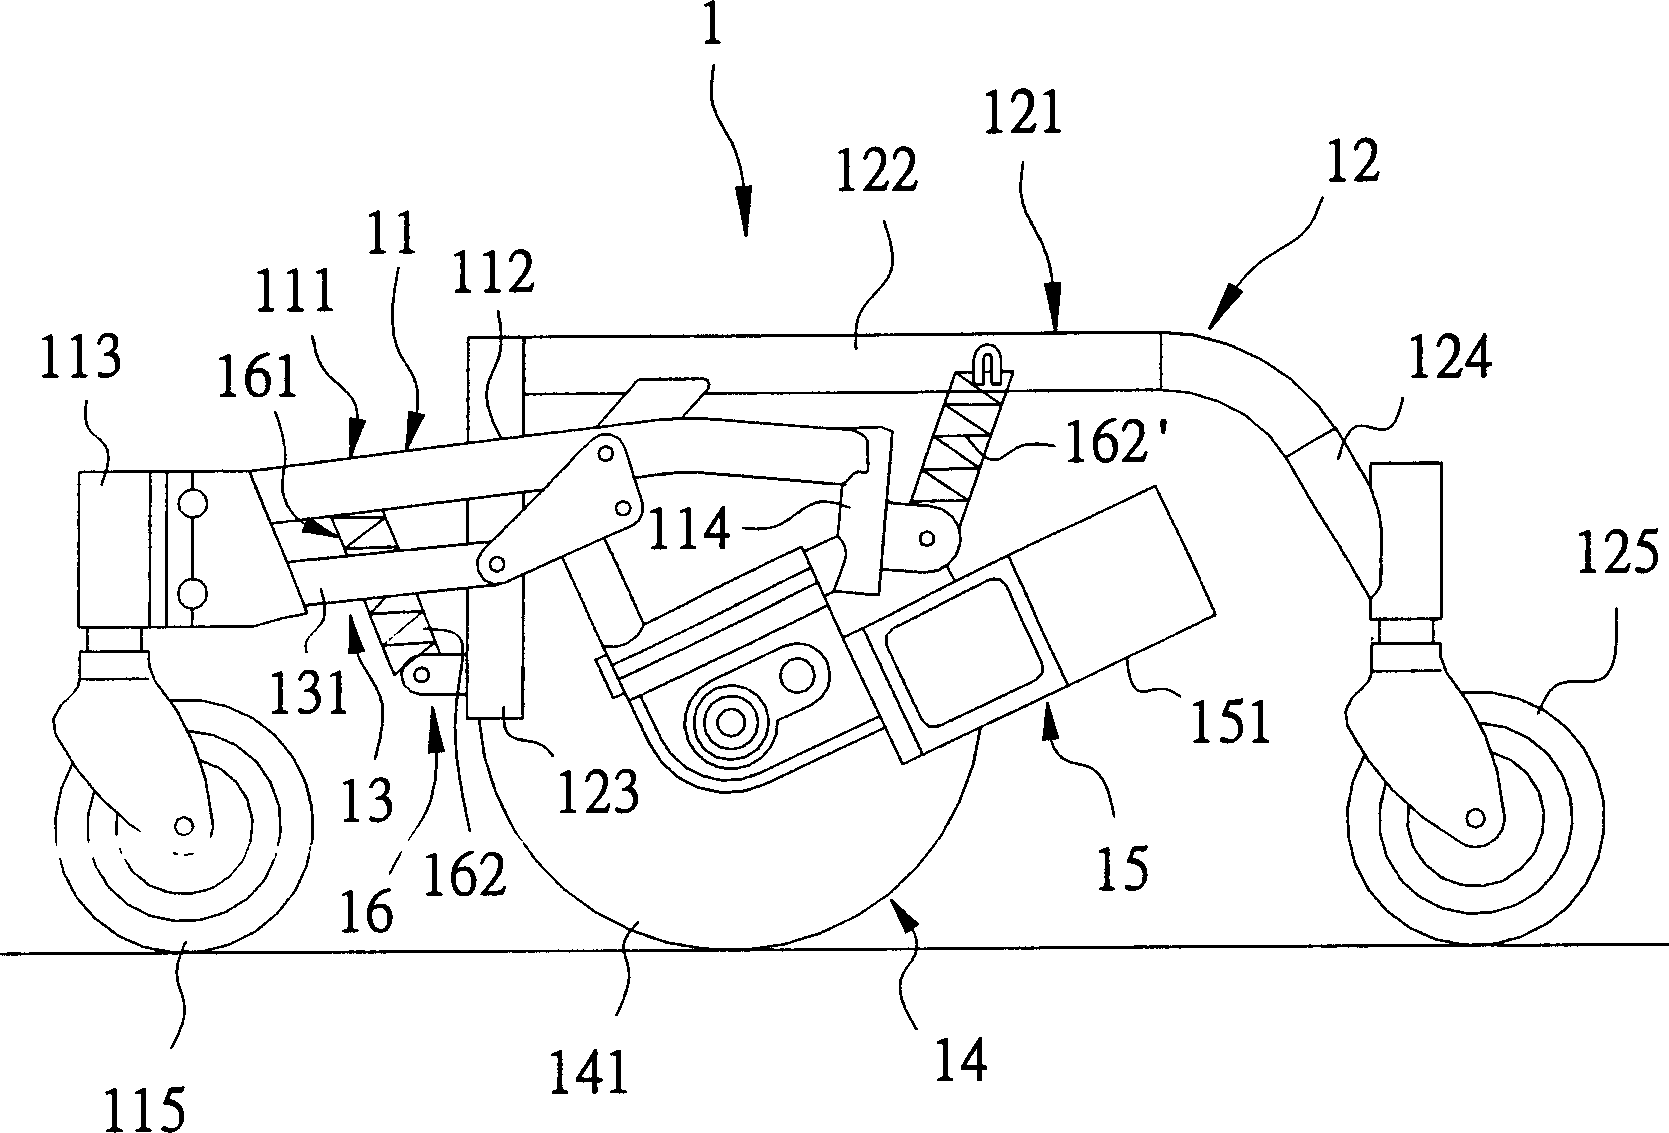 Power-driven wheelchair chassis device